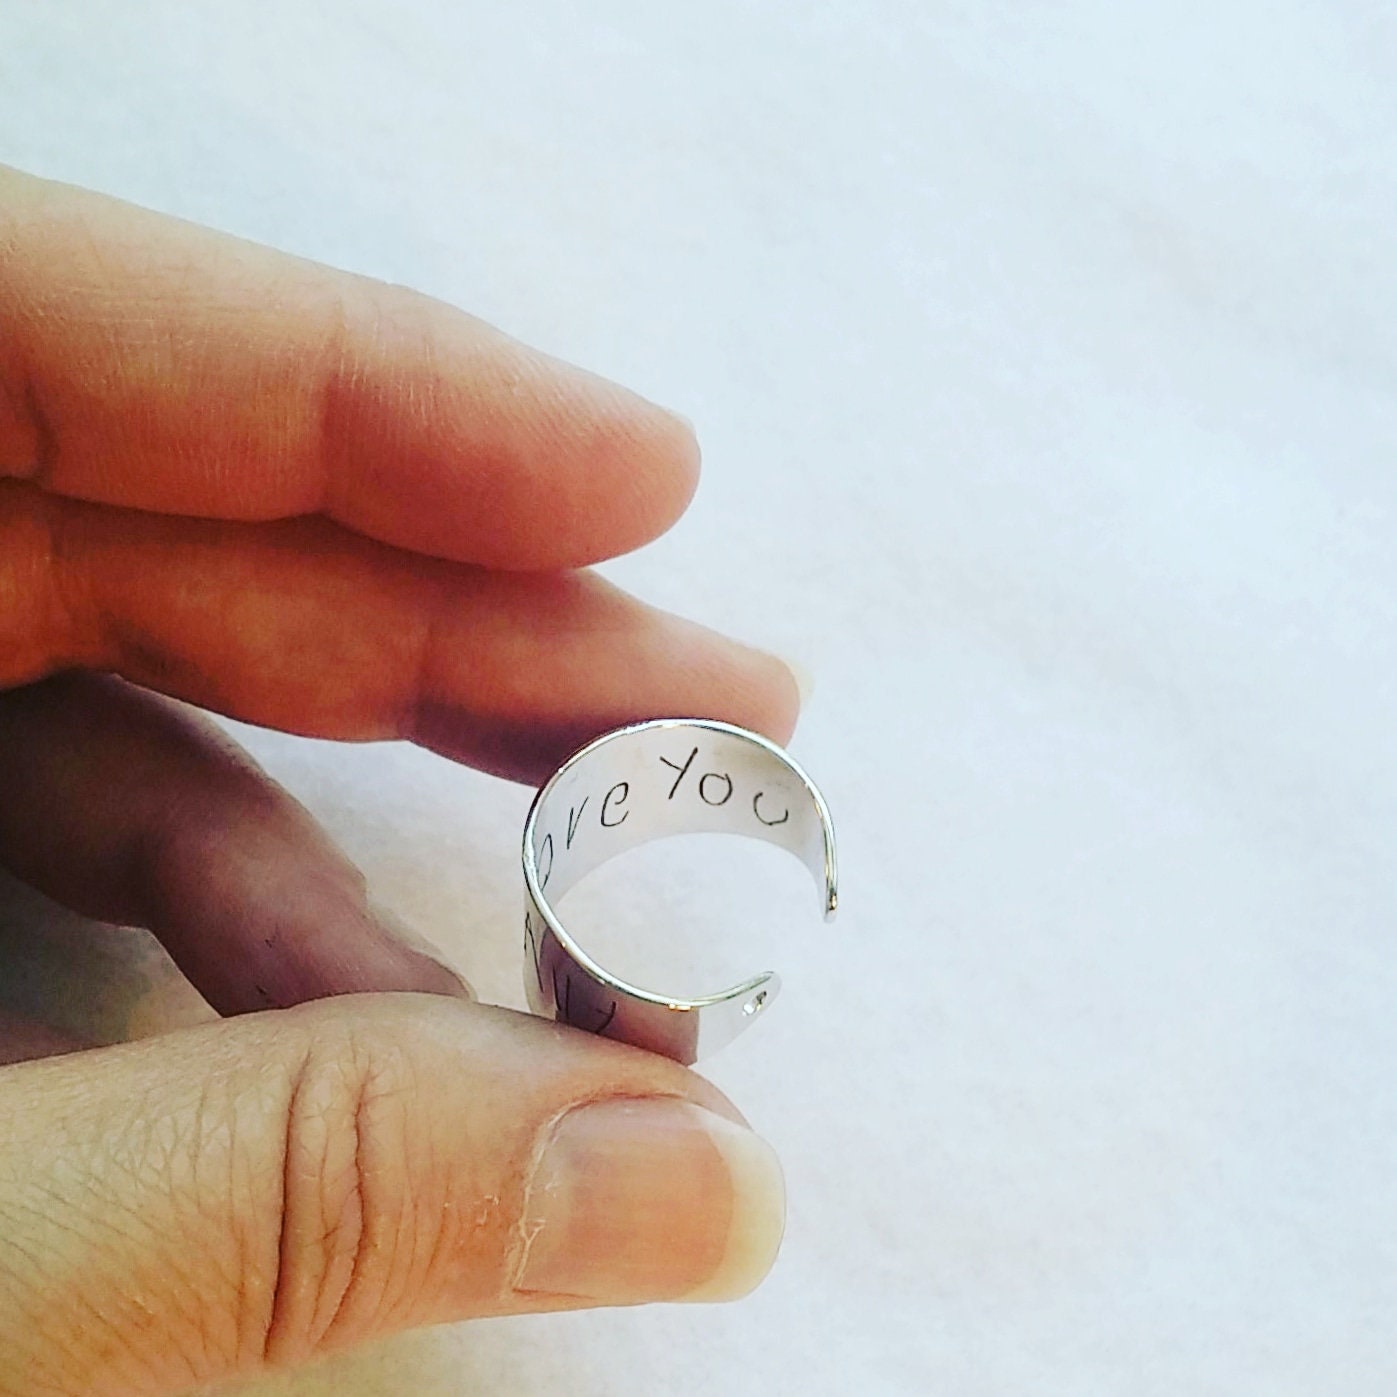 Actual Handwriting ring, engraved on silver/gold/rose gold band